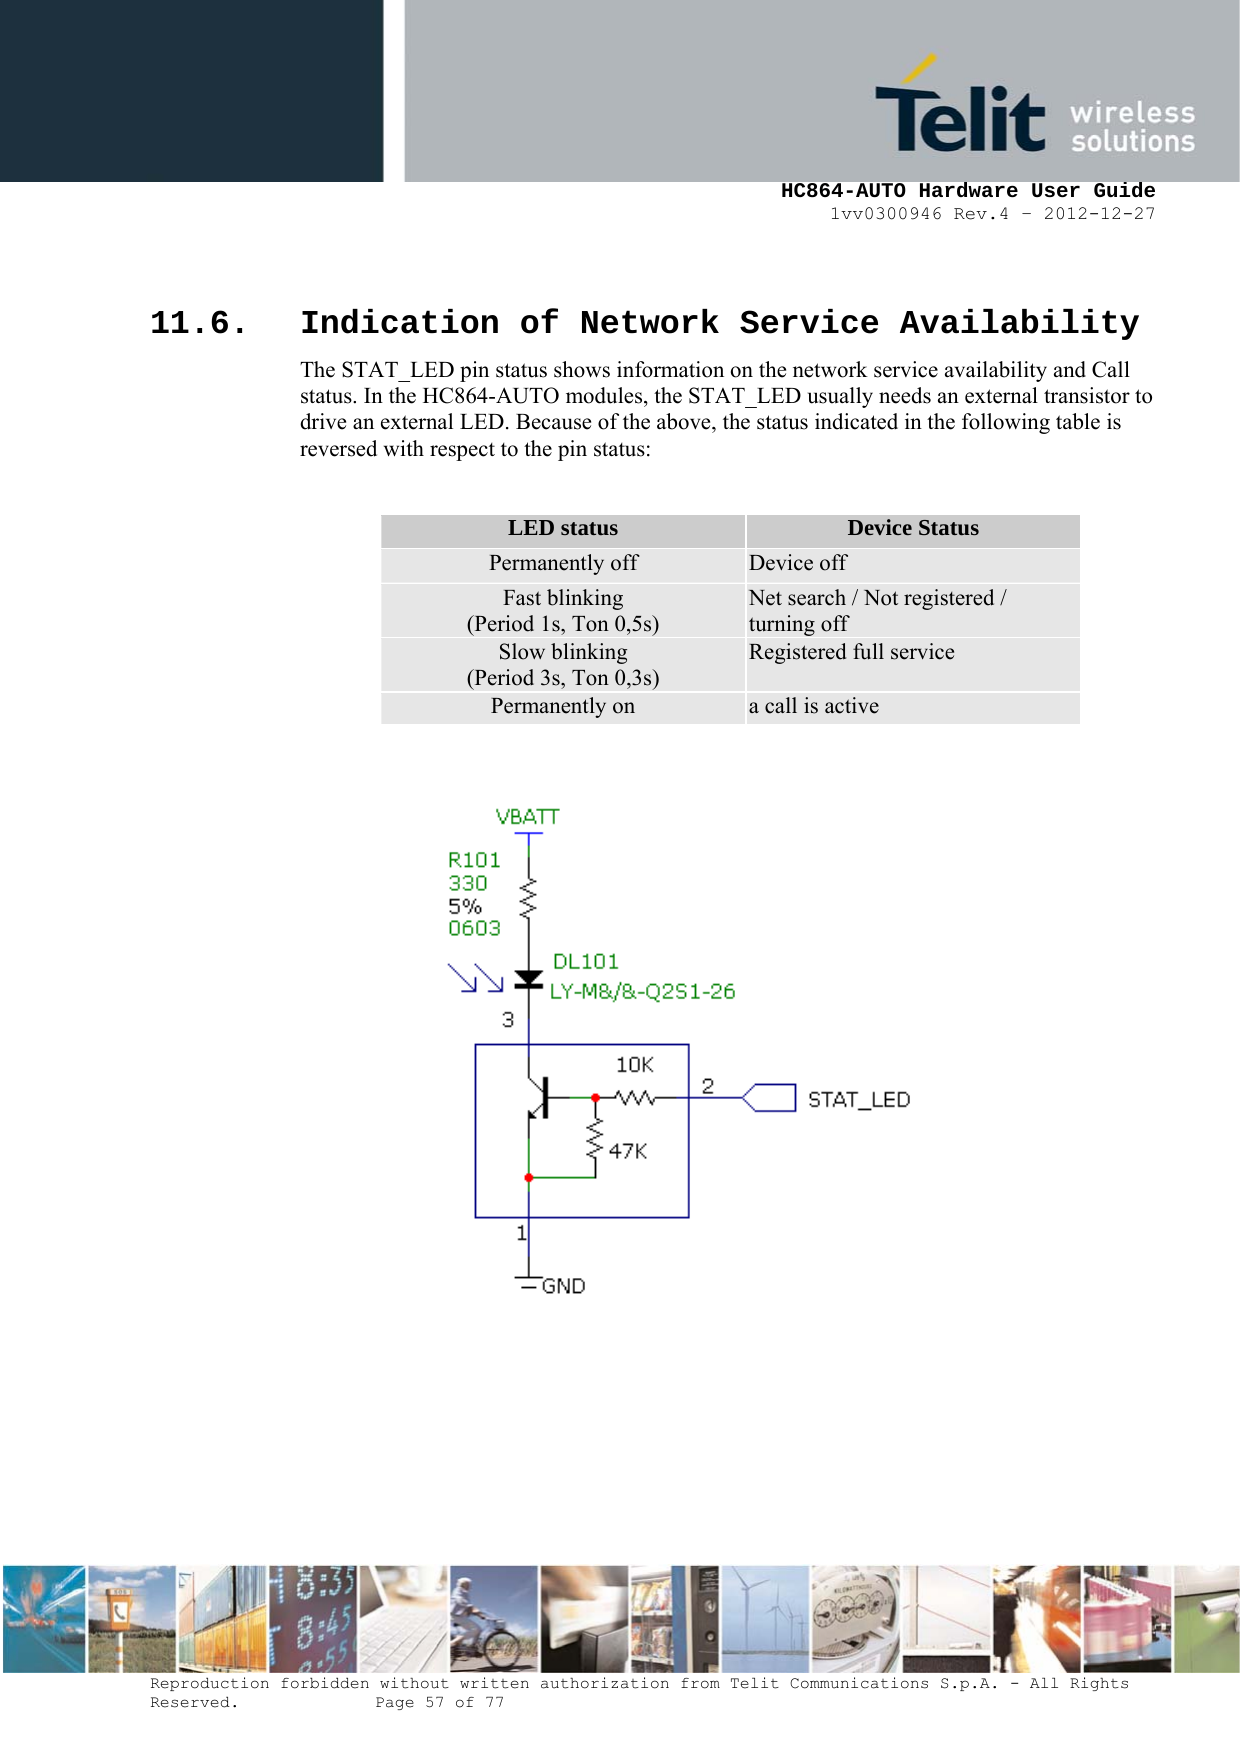     HC864-AUTO Hardware User Guide 1vv0300946 Rev.4 – 2012-12-27 Reproduction forbidden without written authorization from Telit Communications S.p.A. - All Rights Reserved.    Page 57 of 77   11.6. Indication of Network Service Availability The STAT_LED pin status shows information on the network service availability and Call status. In the HC864-AUTO modules, the STAT_LED usually needs an external transistor to drive an external LED. Because of the above, the status indicated in the following table is reversed with respect to the pin status:  LED status  Device Status Permanently off  Device off Fast blinking (Period 1s, Ton 0,5s) Net search / Not registered / turning off Slow blinking (Period 3s, Ton 0,3s) Registered full service Permanently on  a call is active            